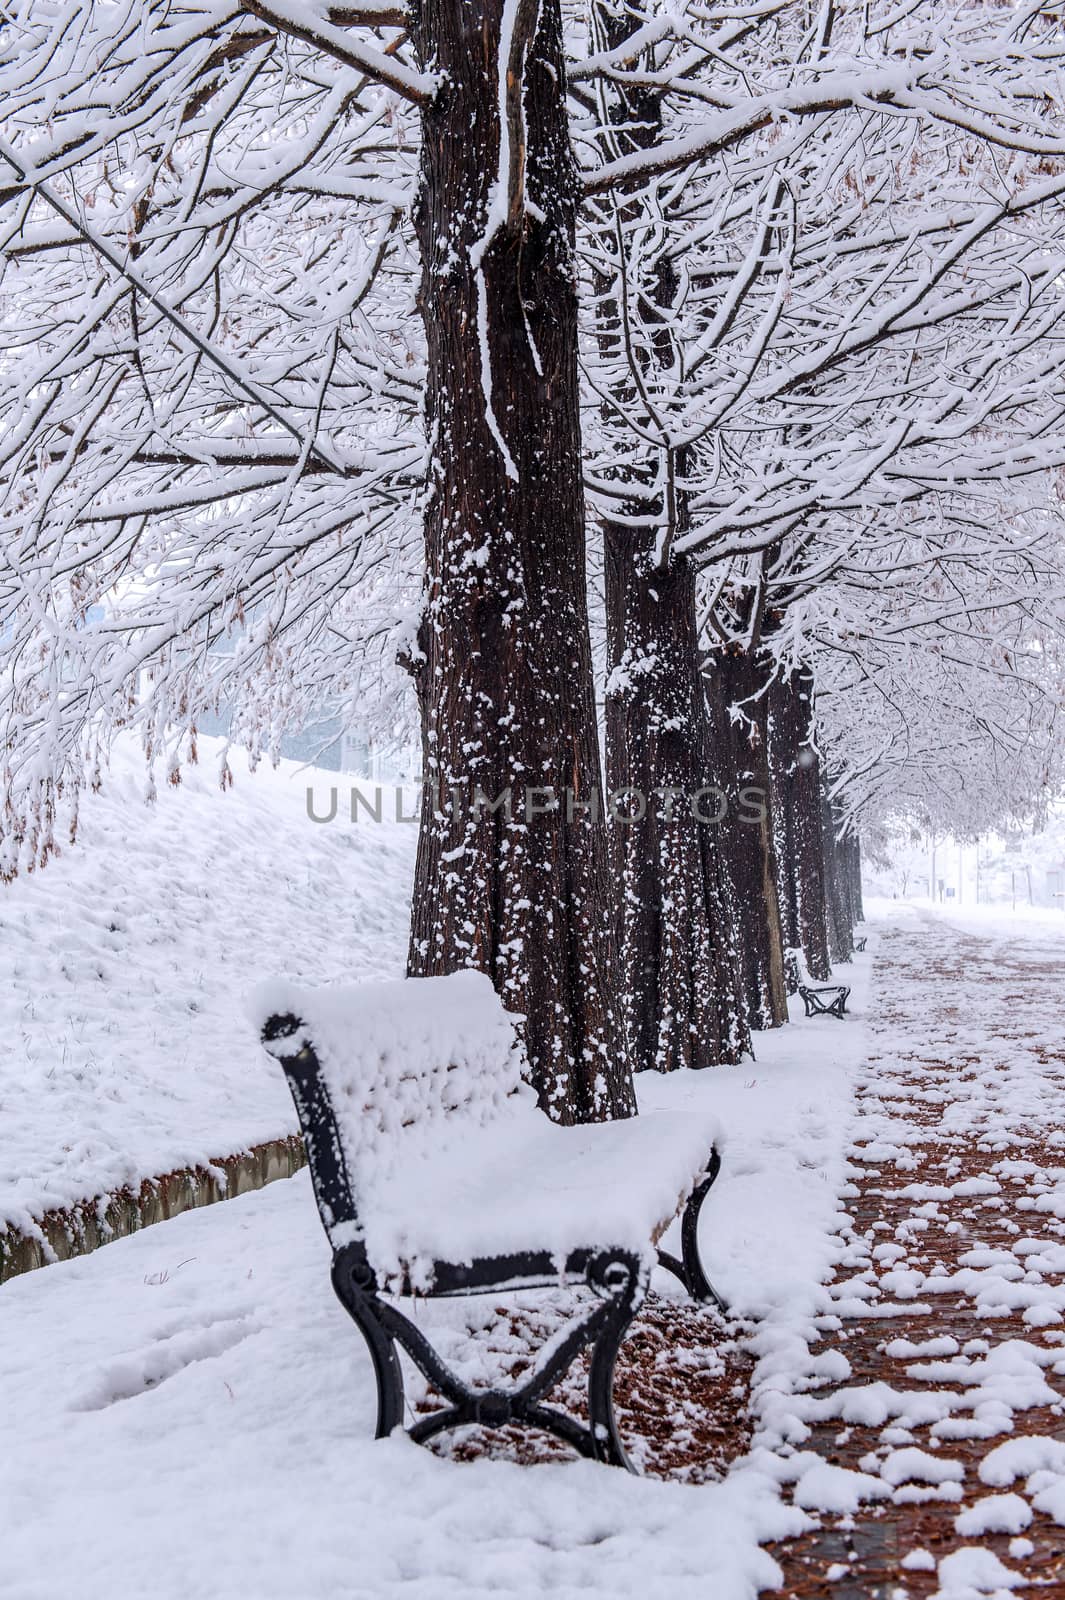 View of bench and trees with falling snow.